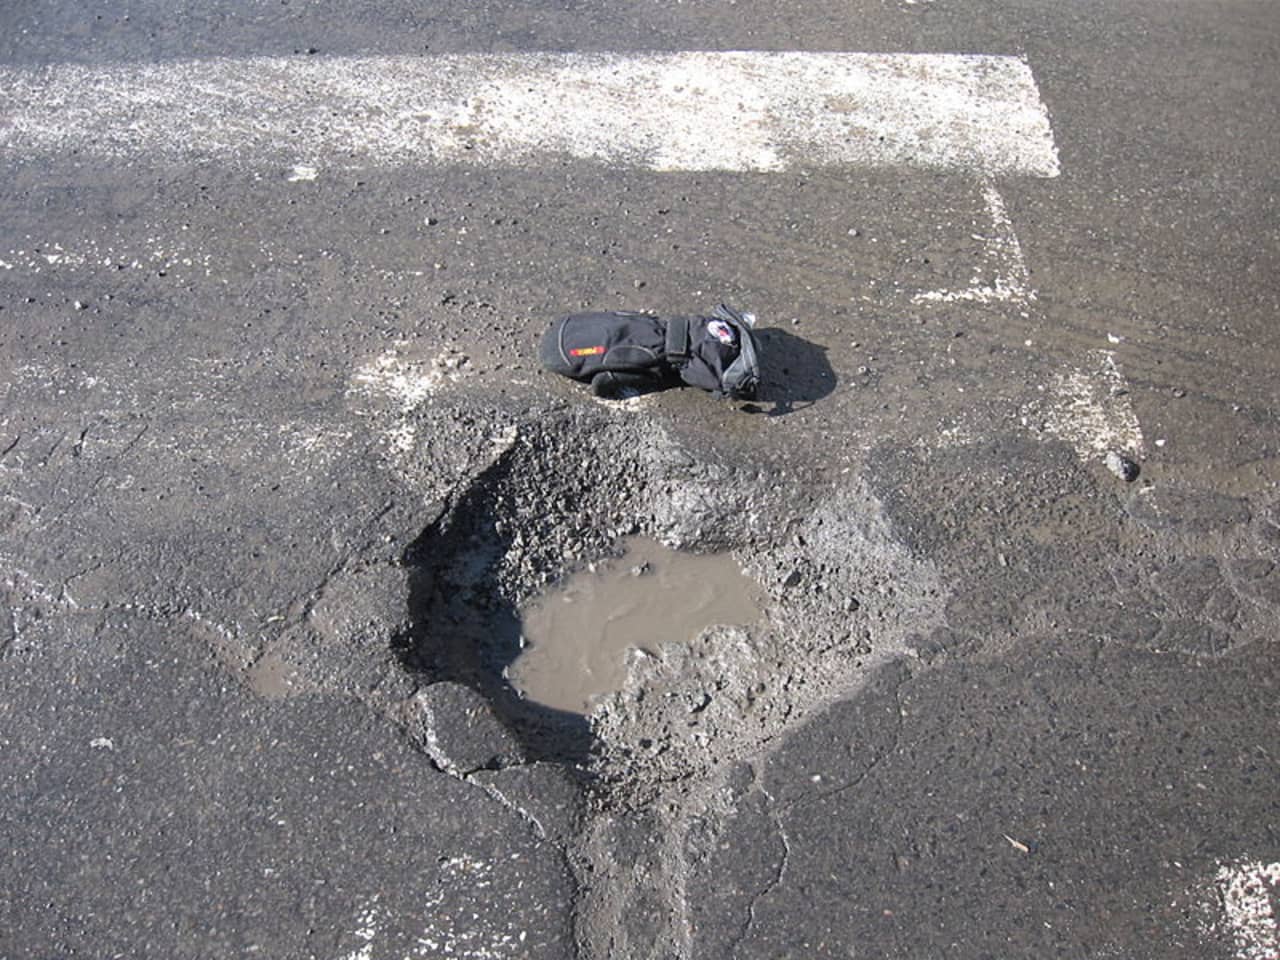 Somers residents say potholes around town have worsened after recent snowstorms.